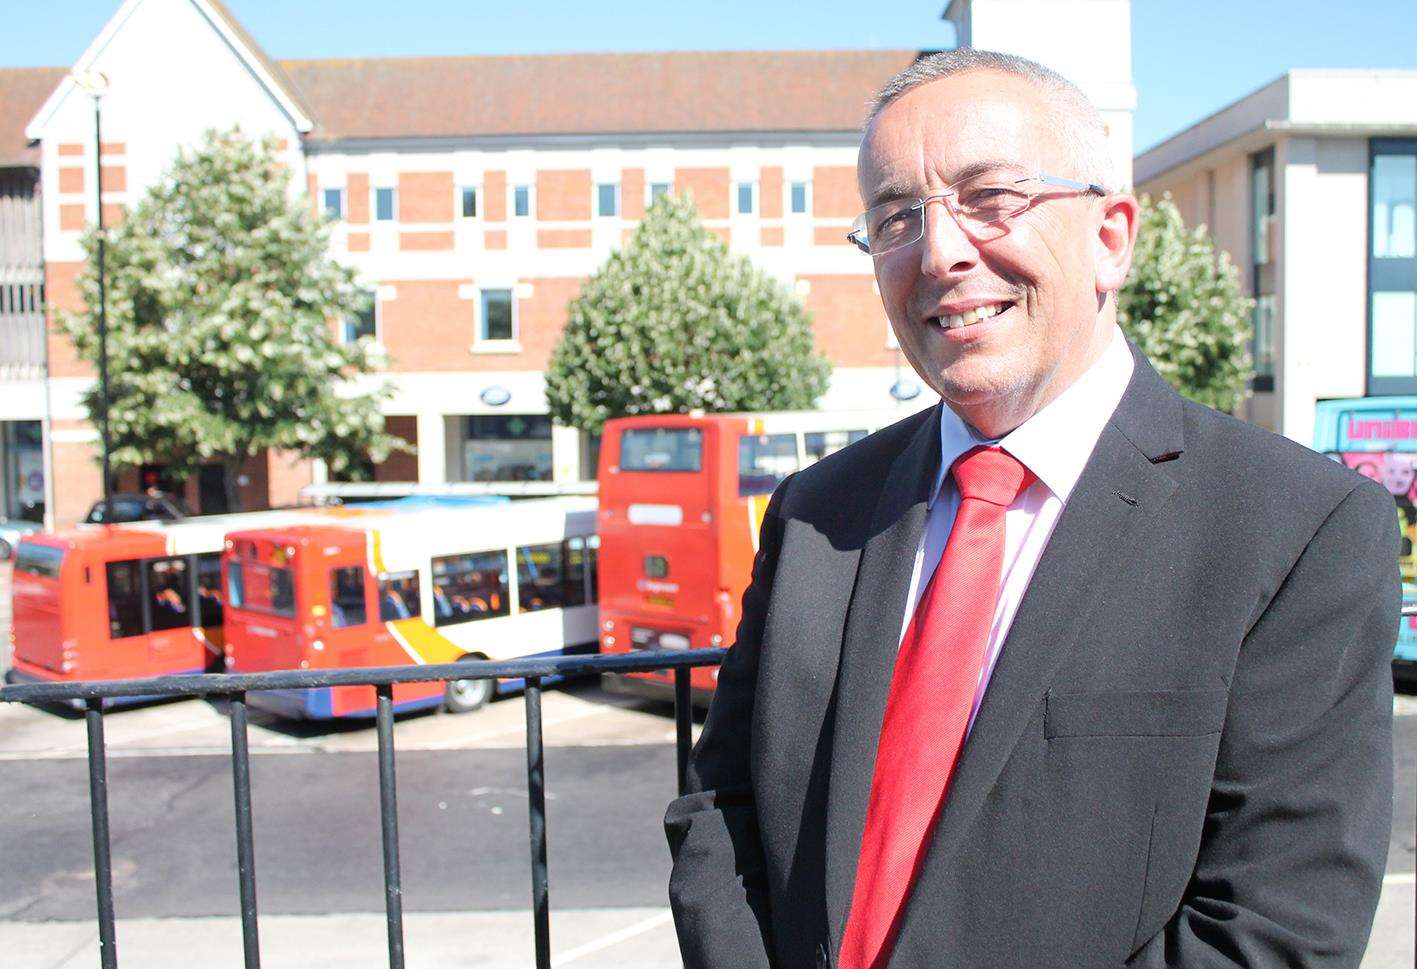 Former Stagecoach regional boss Philip Norwell, who stepped down earlier this year